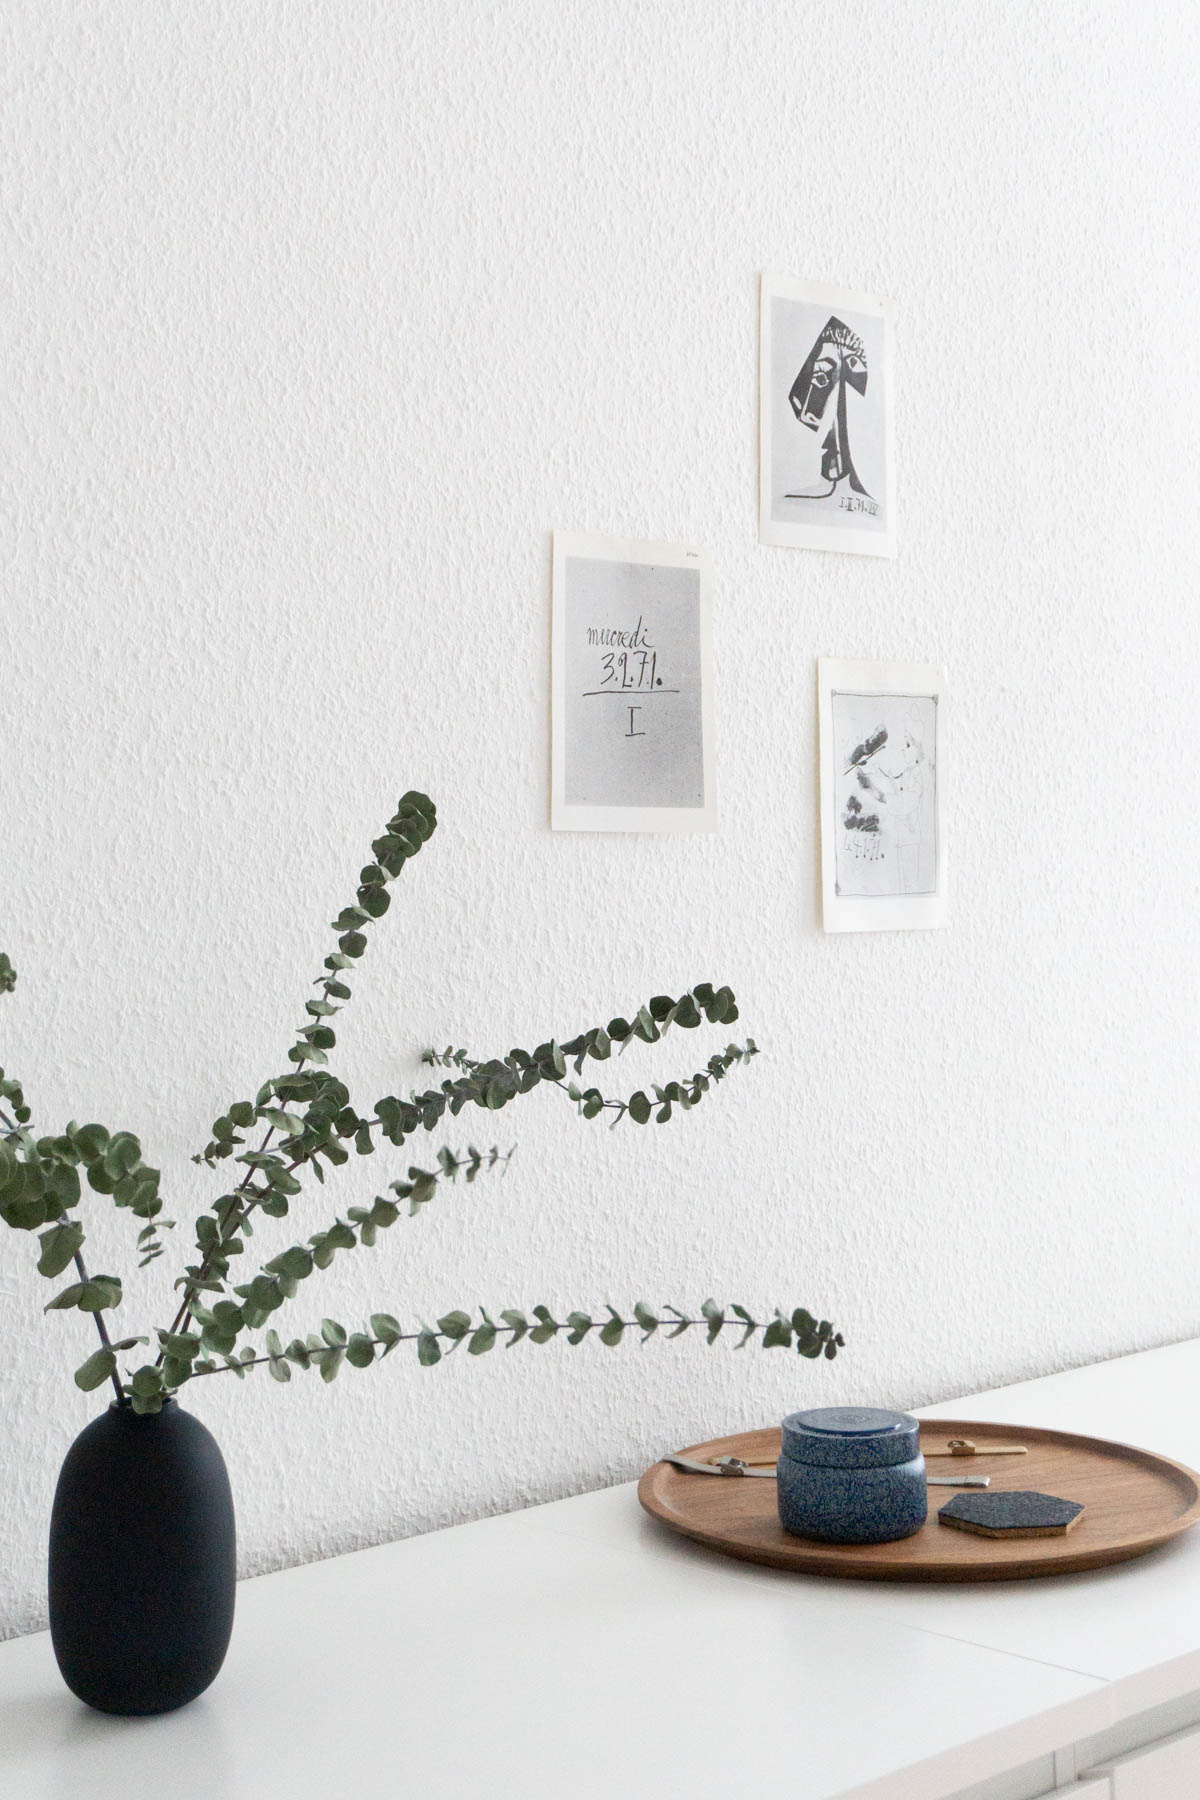 Calming Scandinavian Bedroom Details - Grey and White Prints - RG Daily Blog